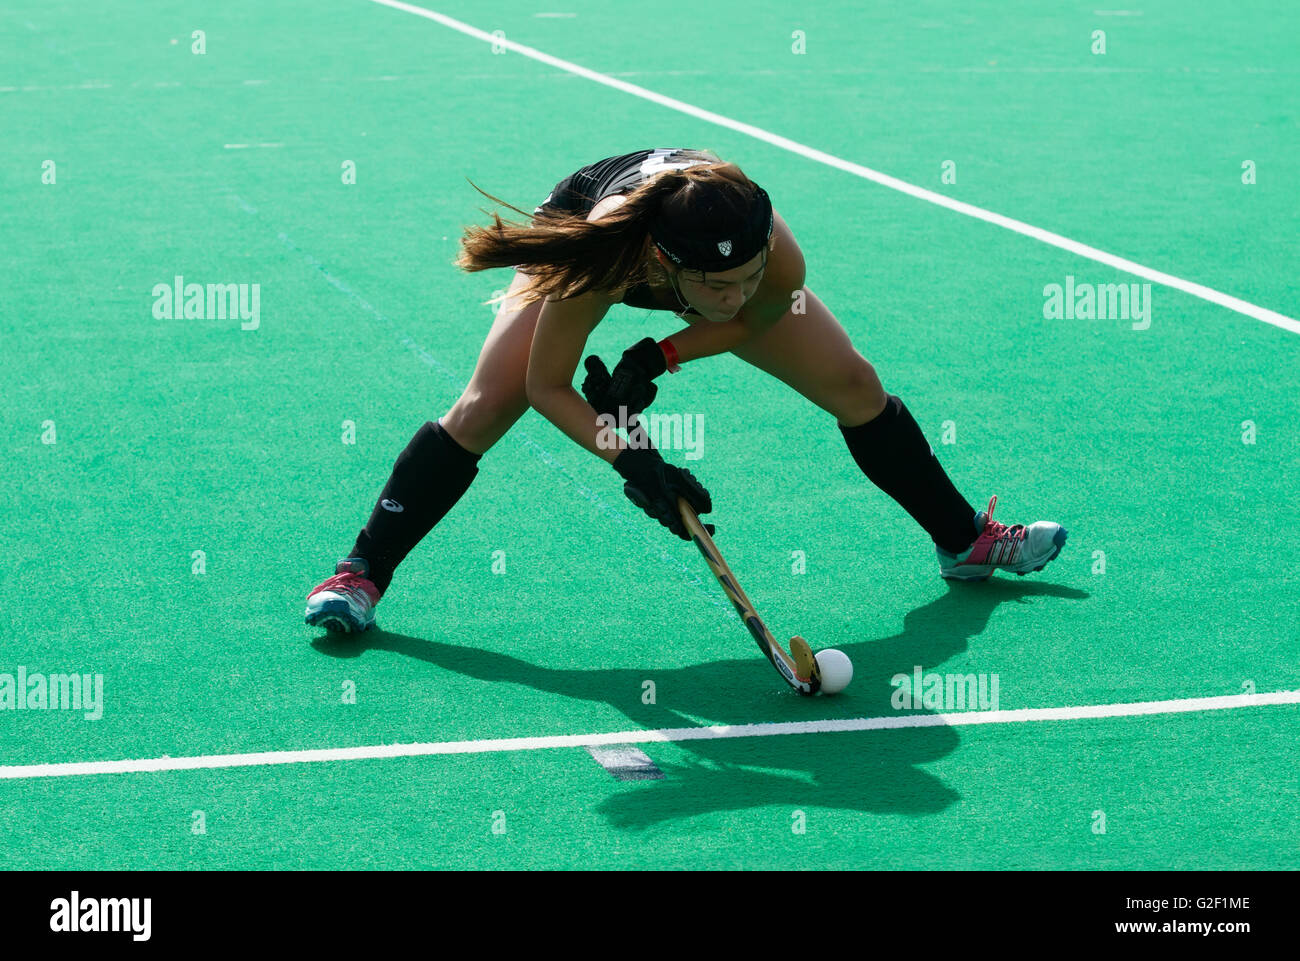 Female Field Hockey player lines up a shot Stock Photo